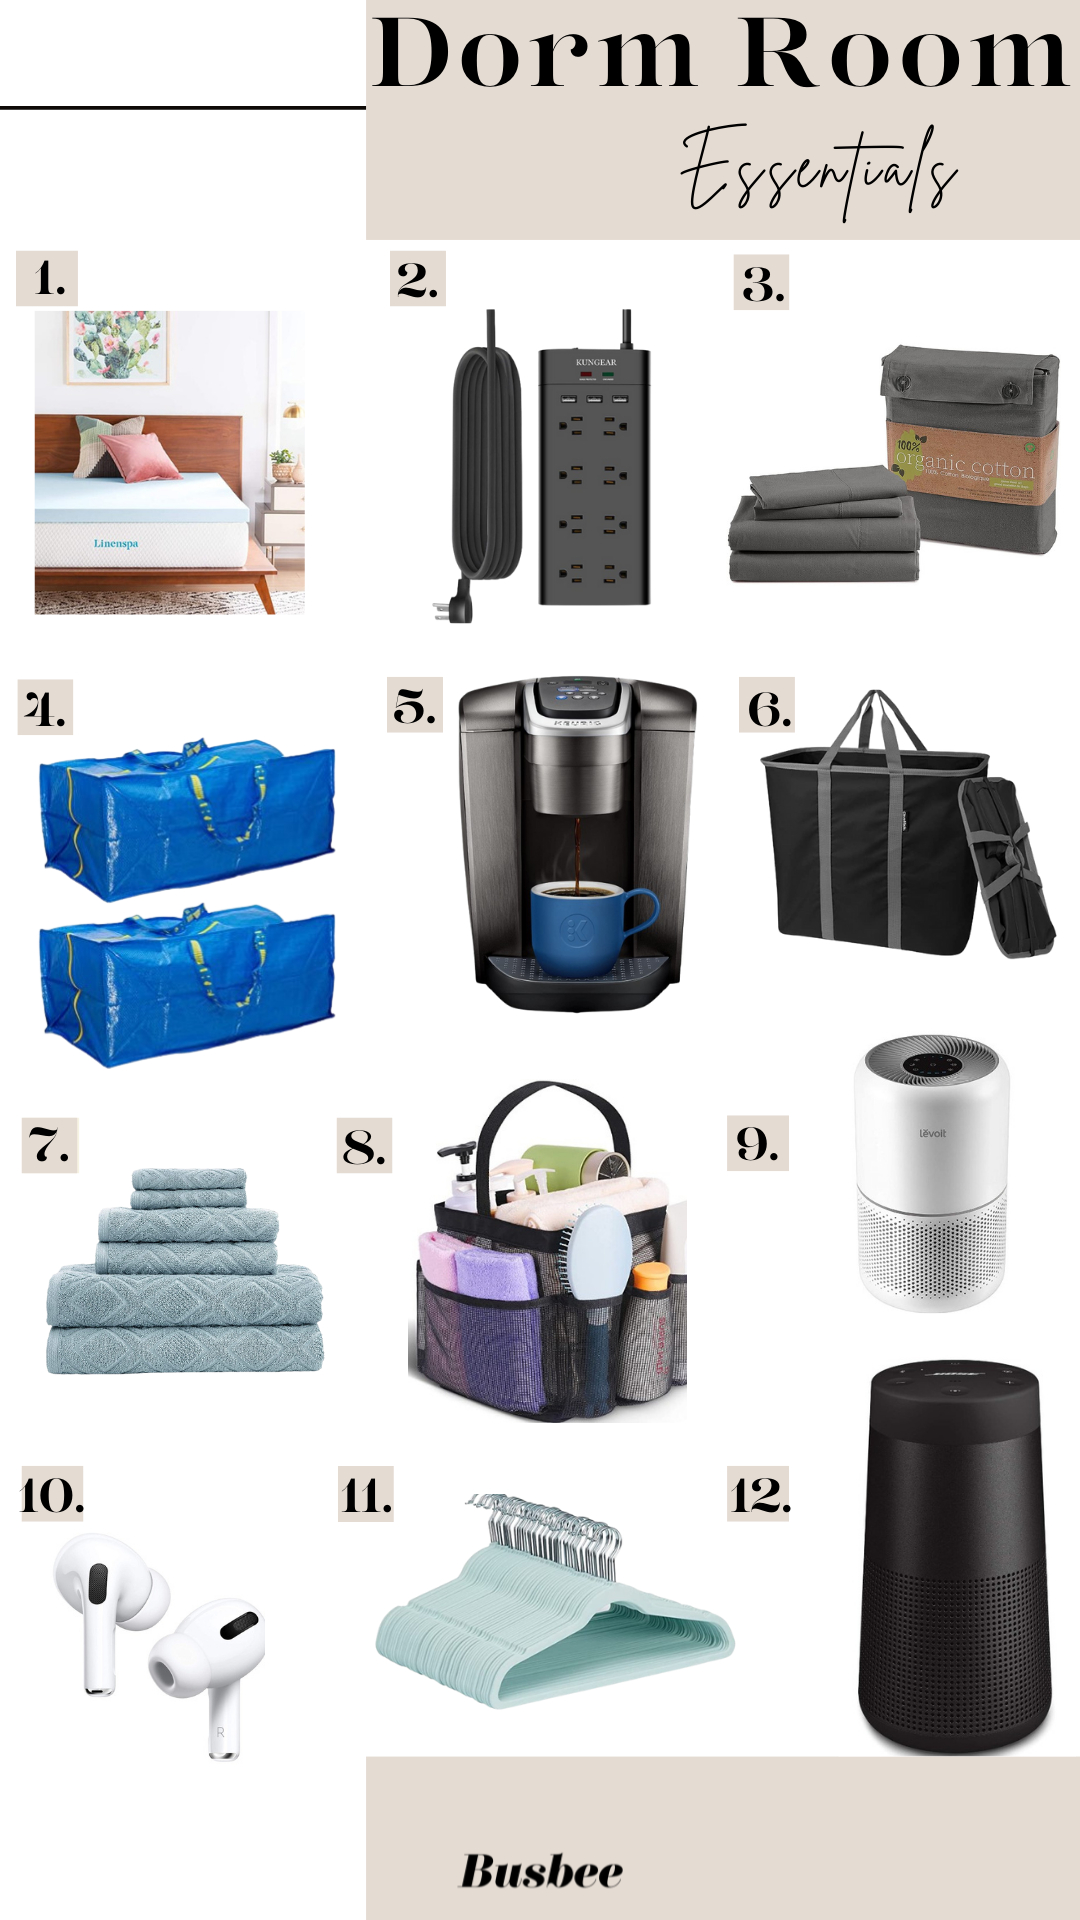 Dorm Room Essentials-amazon prime day-amazon prime deals-best amazong prime day deals-what college kids need-dorm room finds-erin busbee fashion blogger over 40